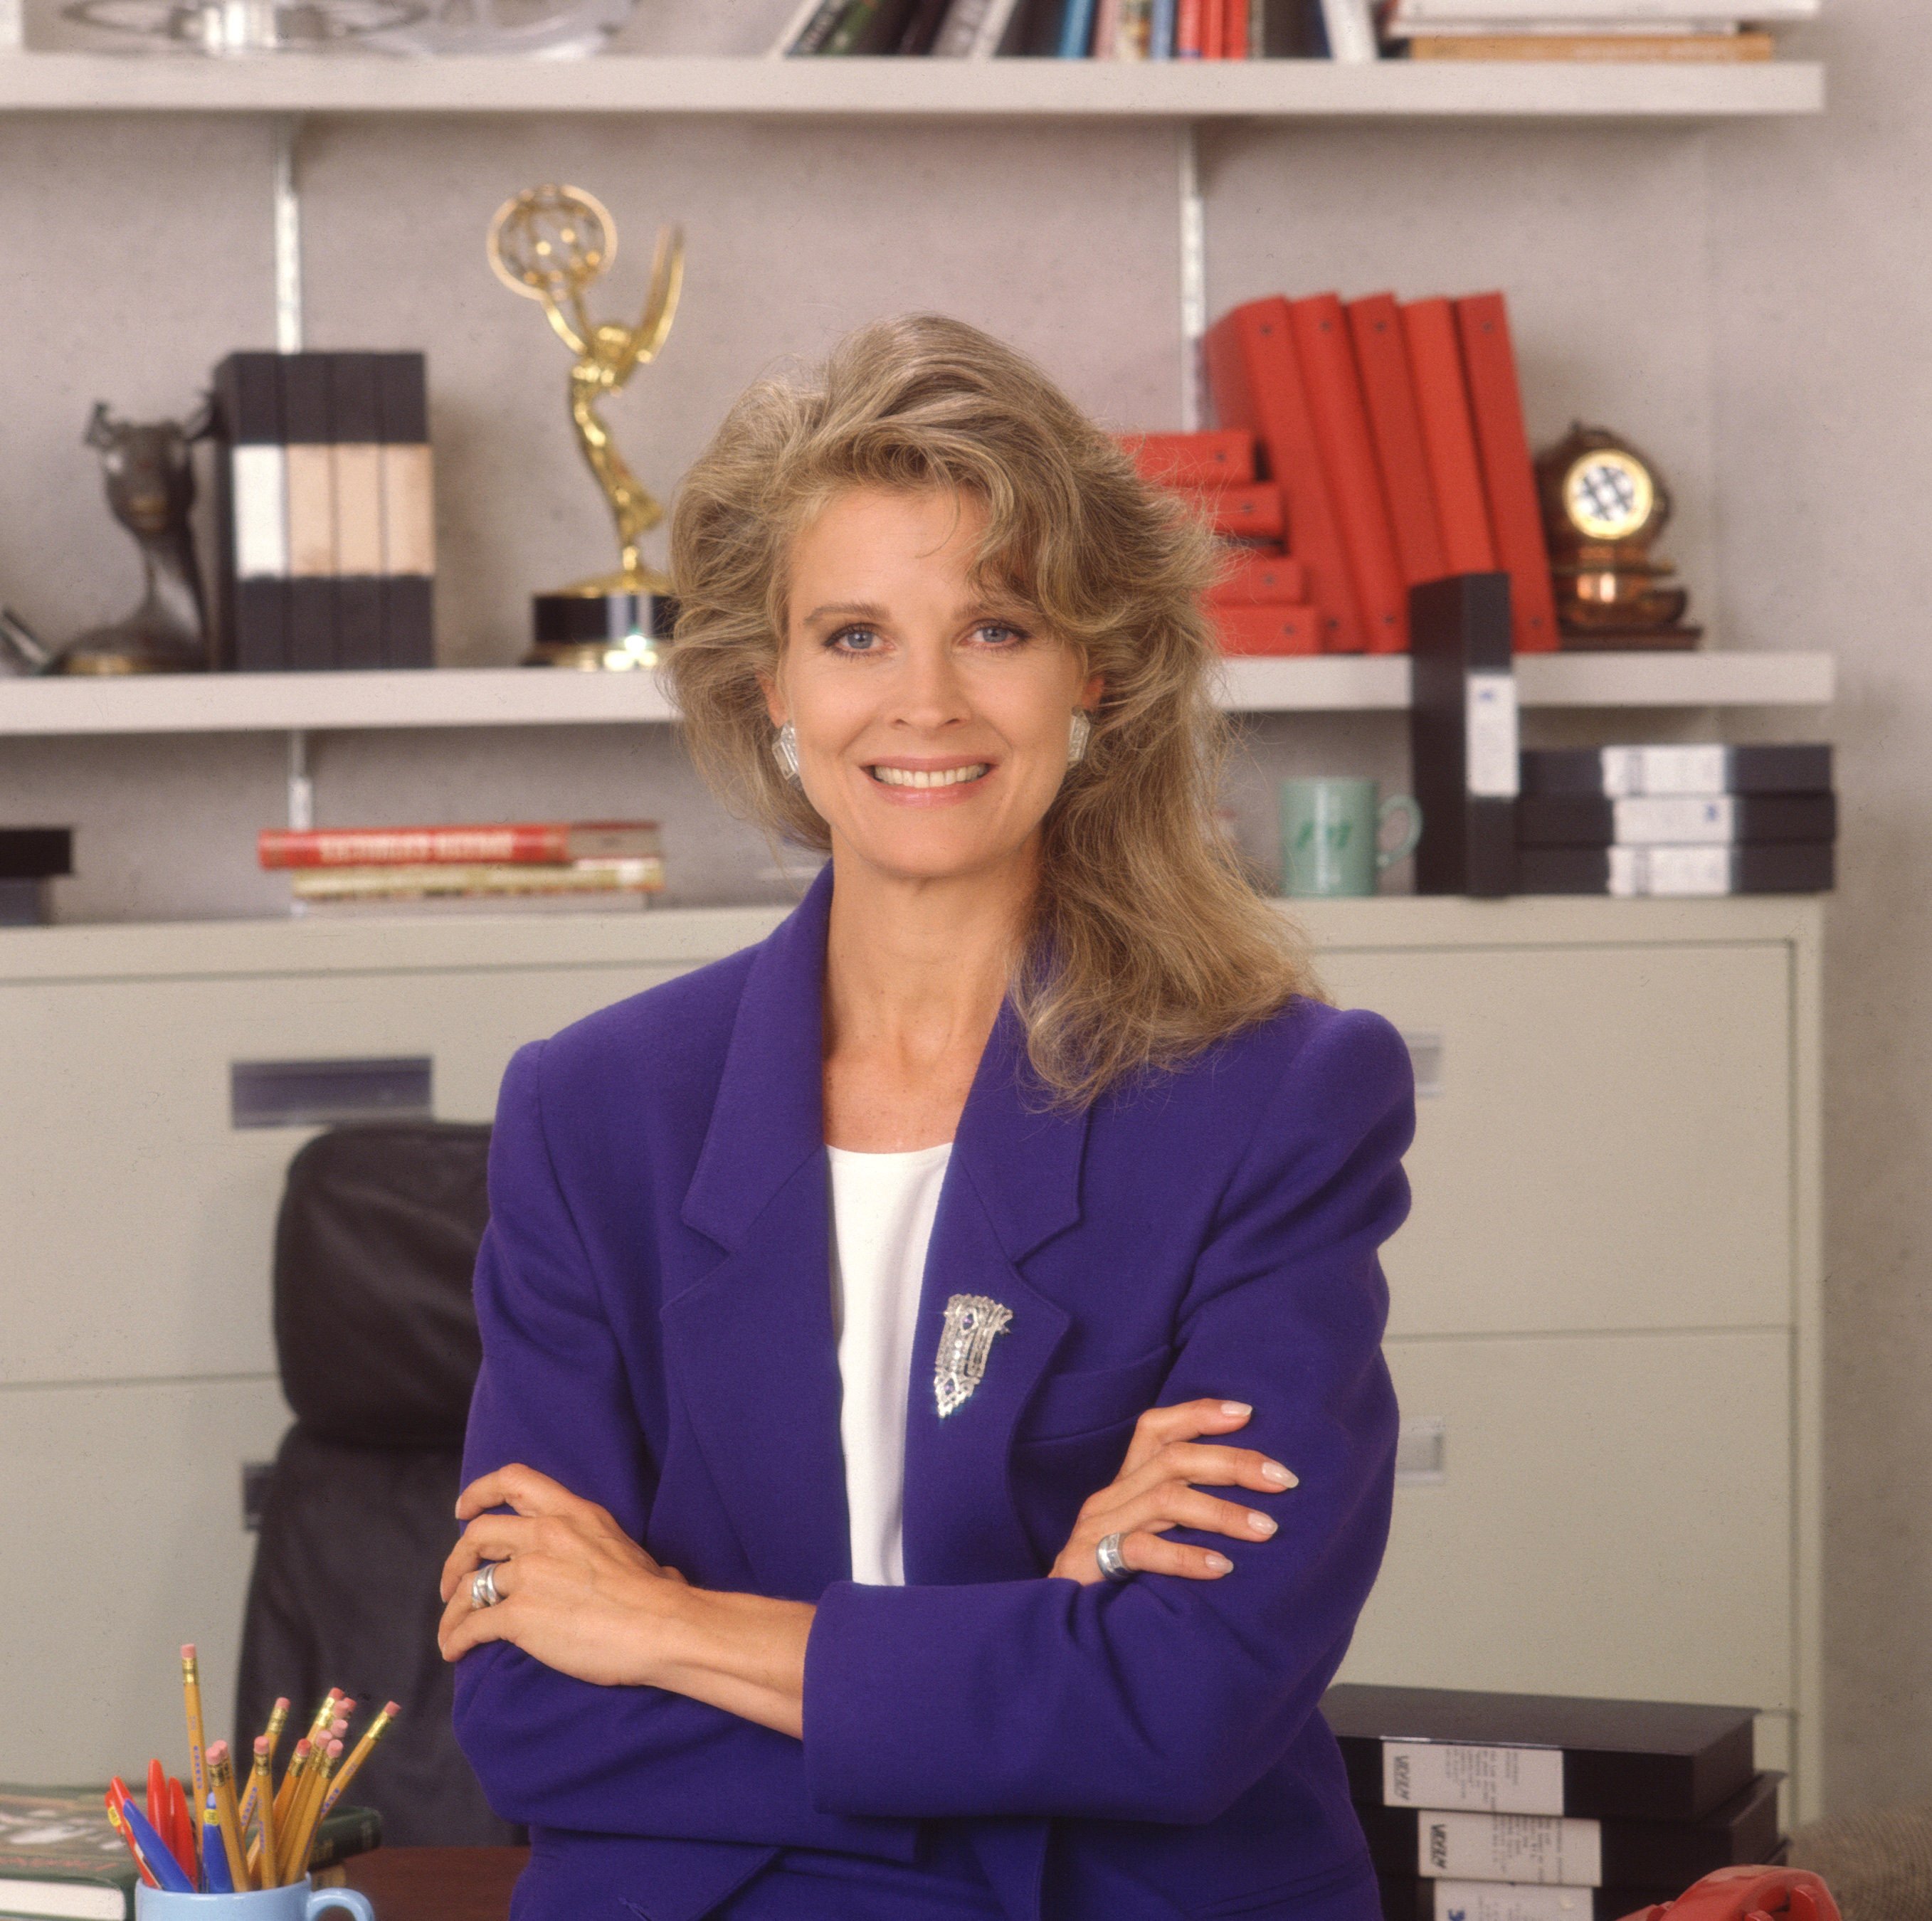 Candice Bergen on "Murphy Brown" in 1993. | Source: Getty Images